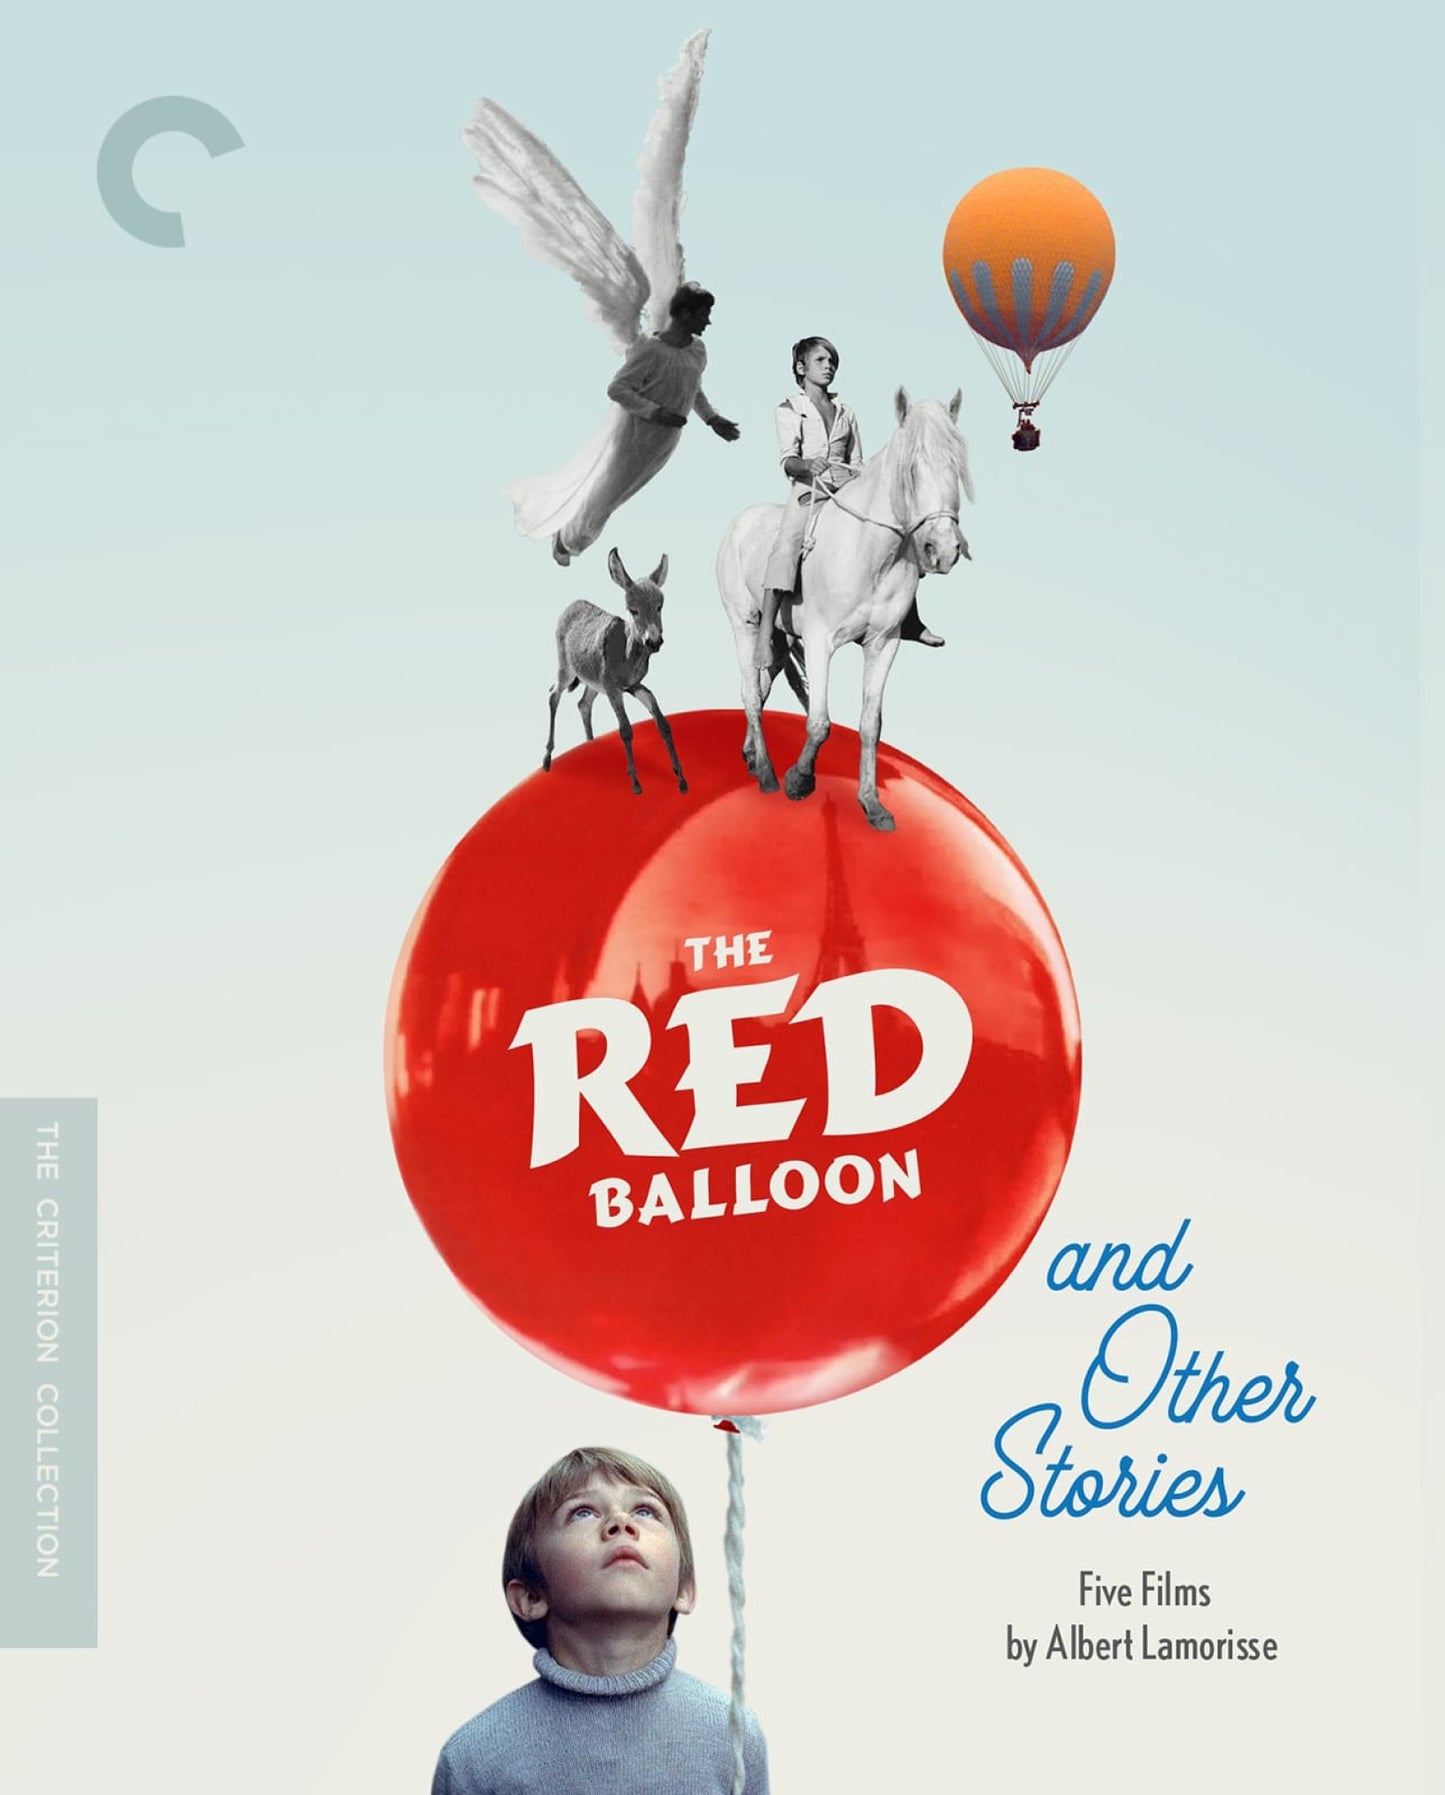 The Red Balloon and Other Stories: Five Films by Albert Lamorisse Blu-ray with Slip (Criterion Collection)